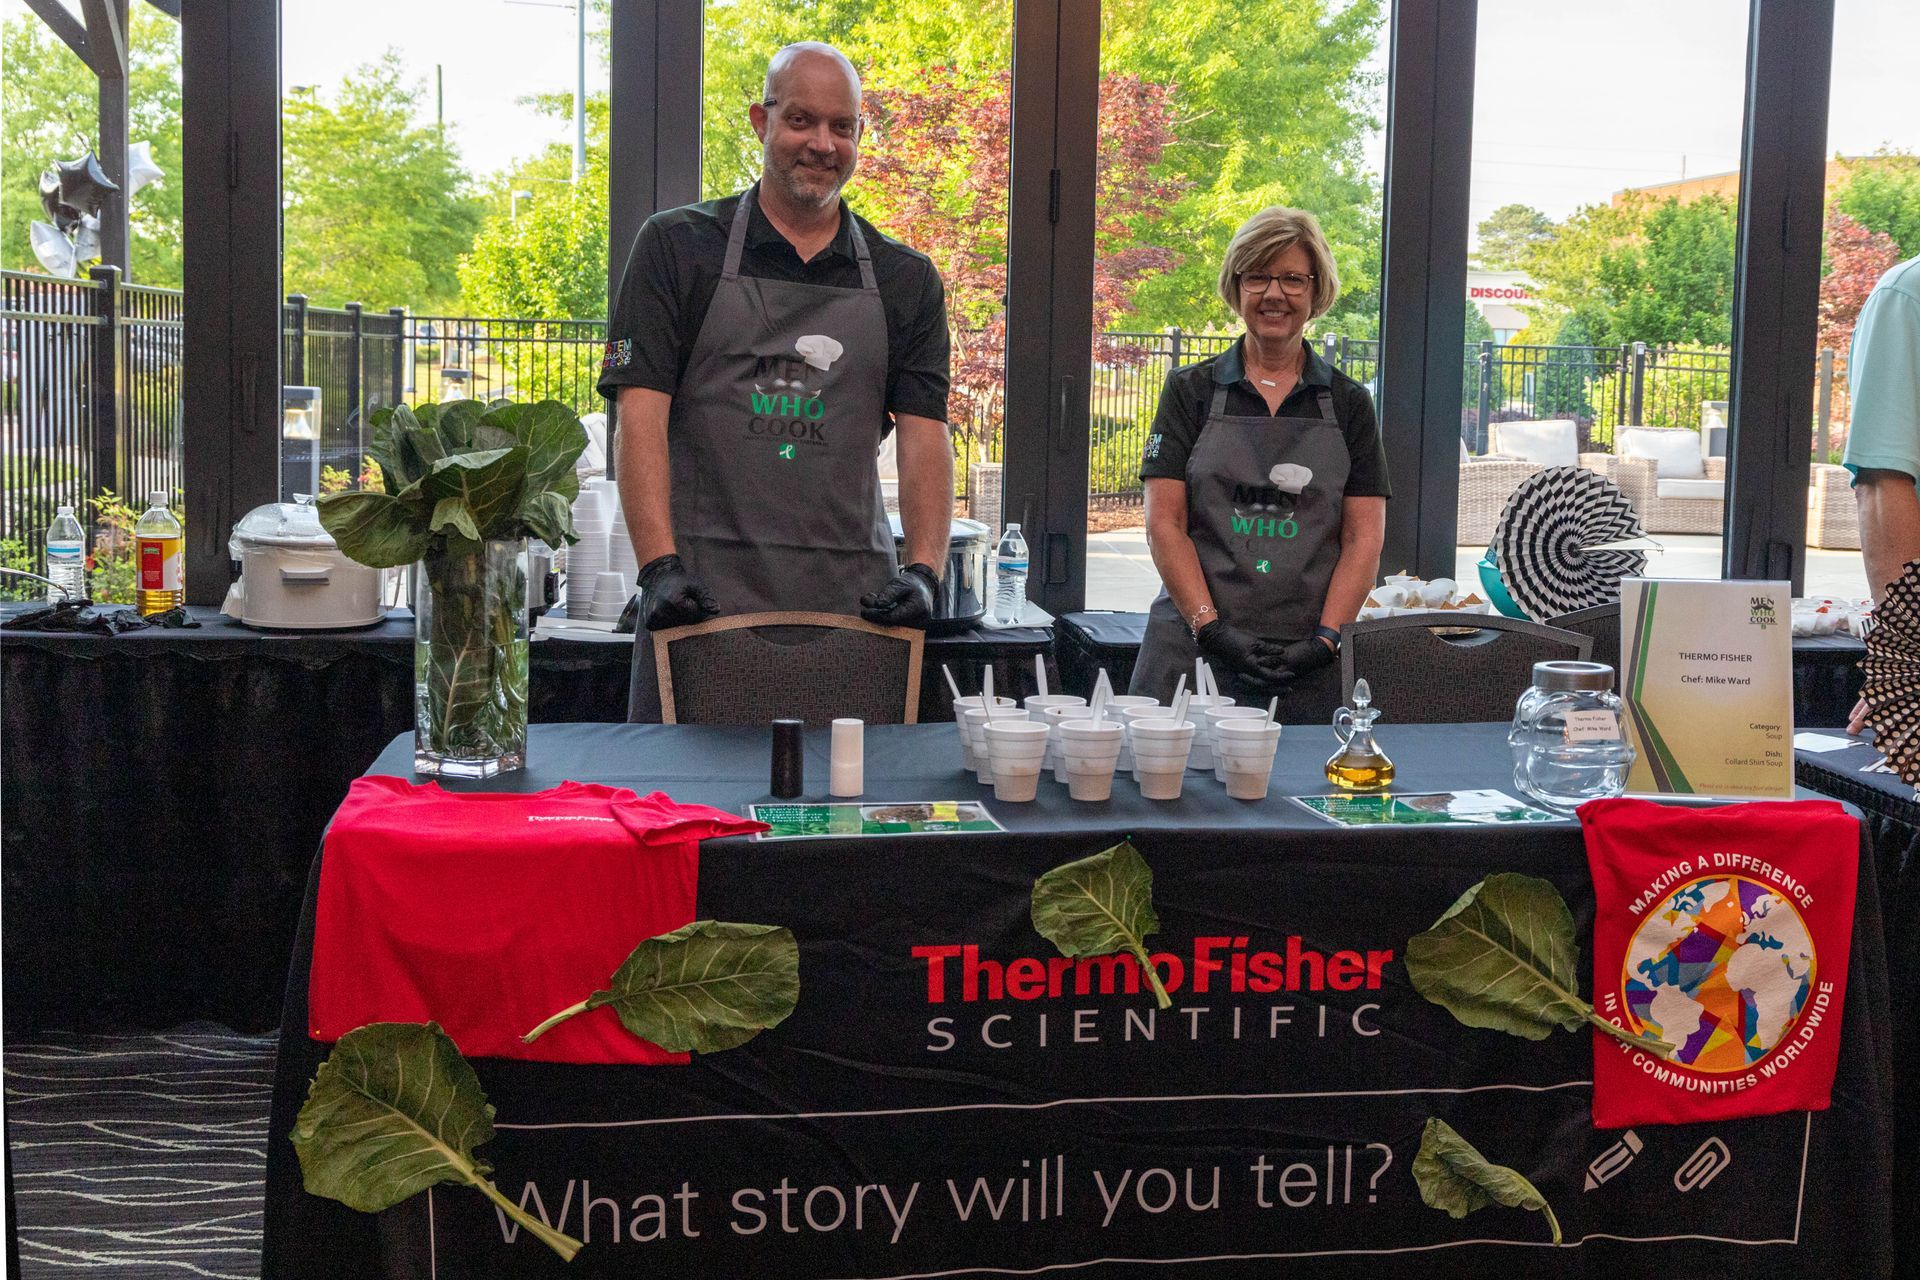 a man and a woman are standing behind a table that says thermo fisher scientific